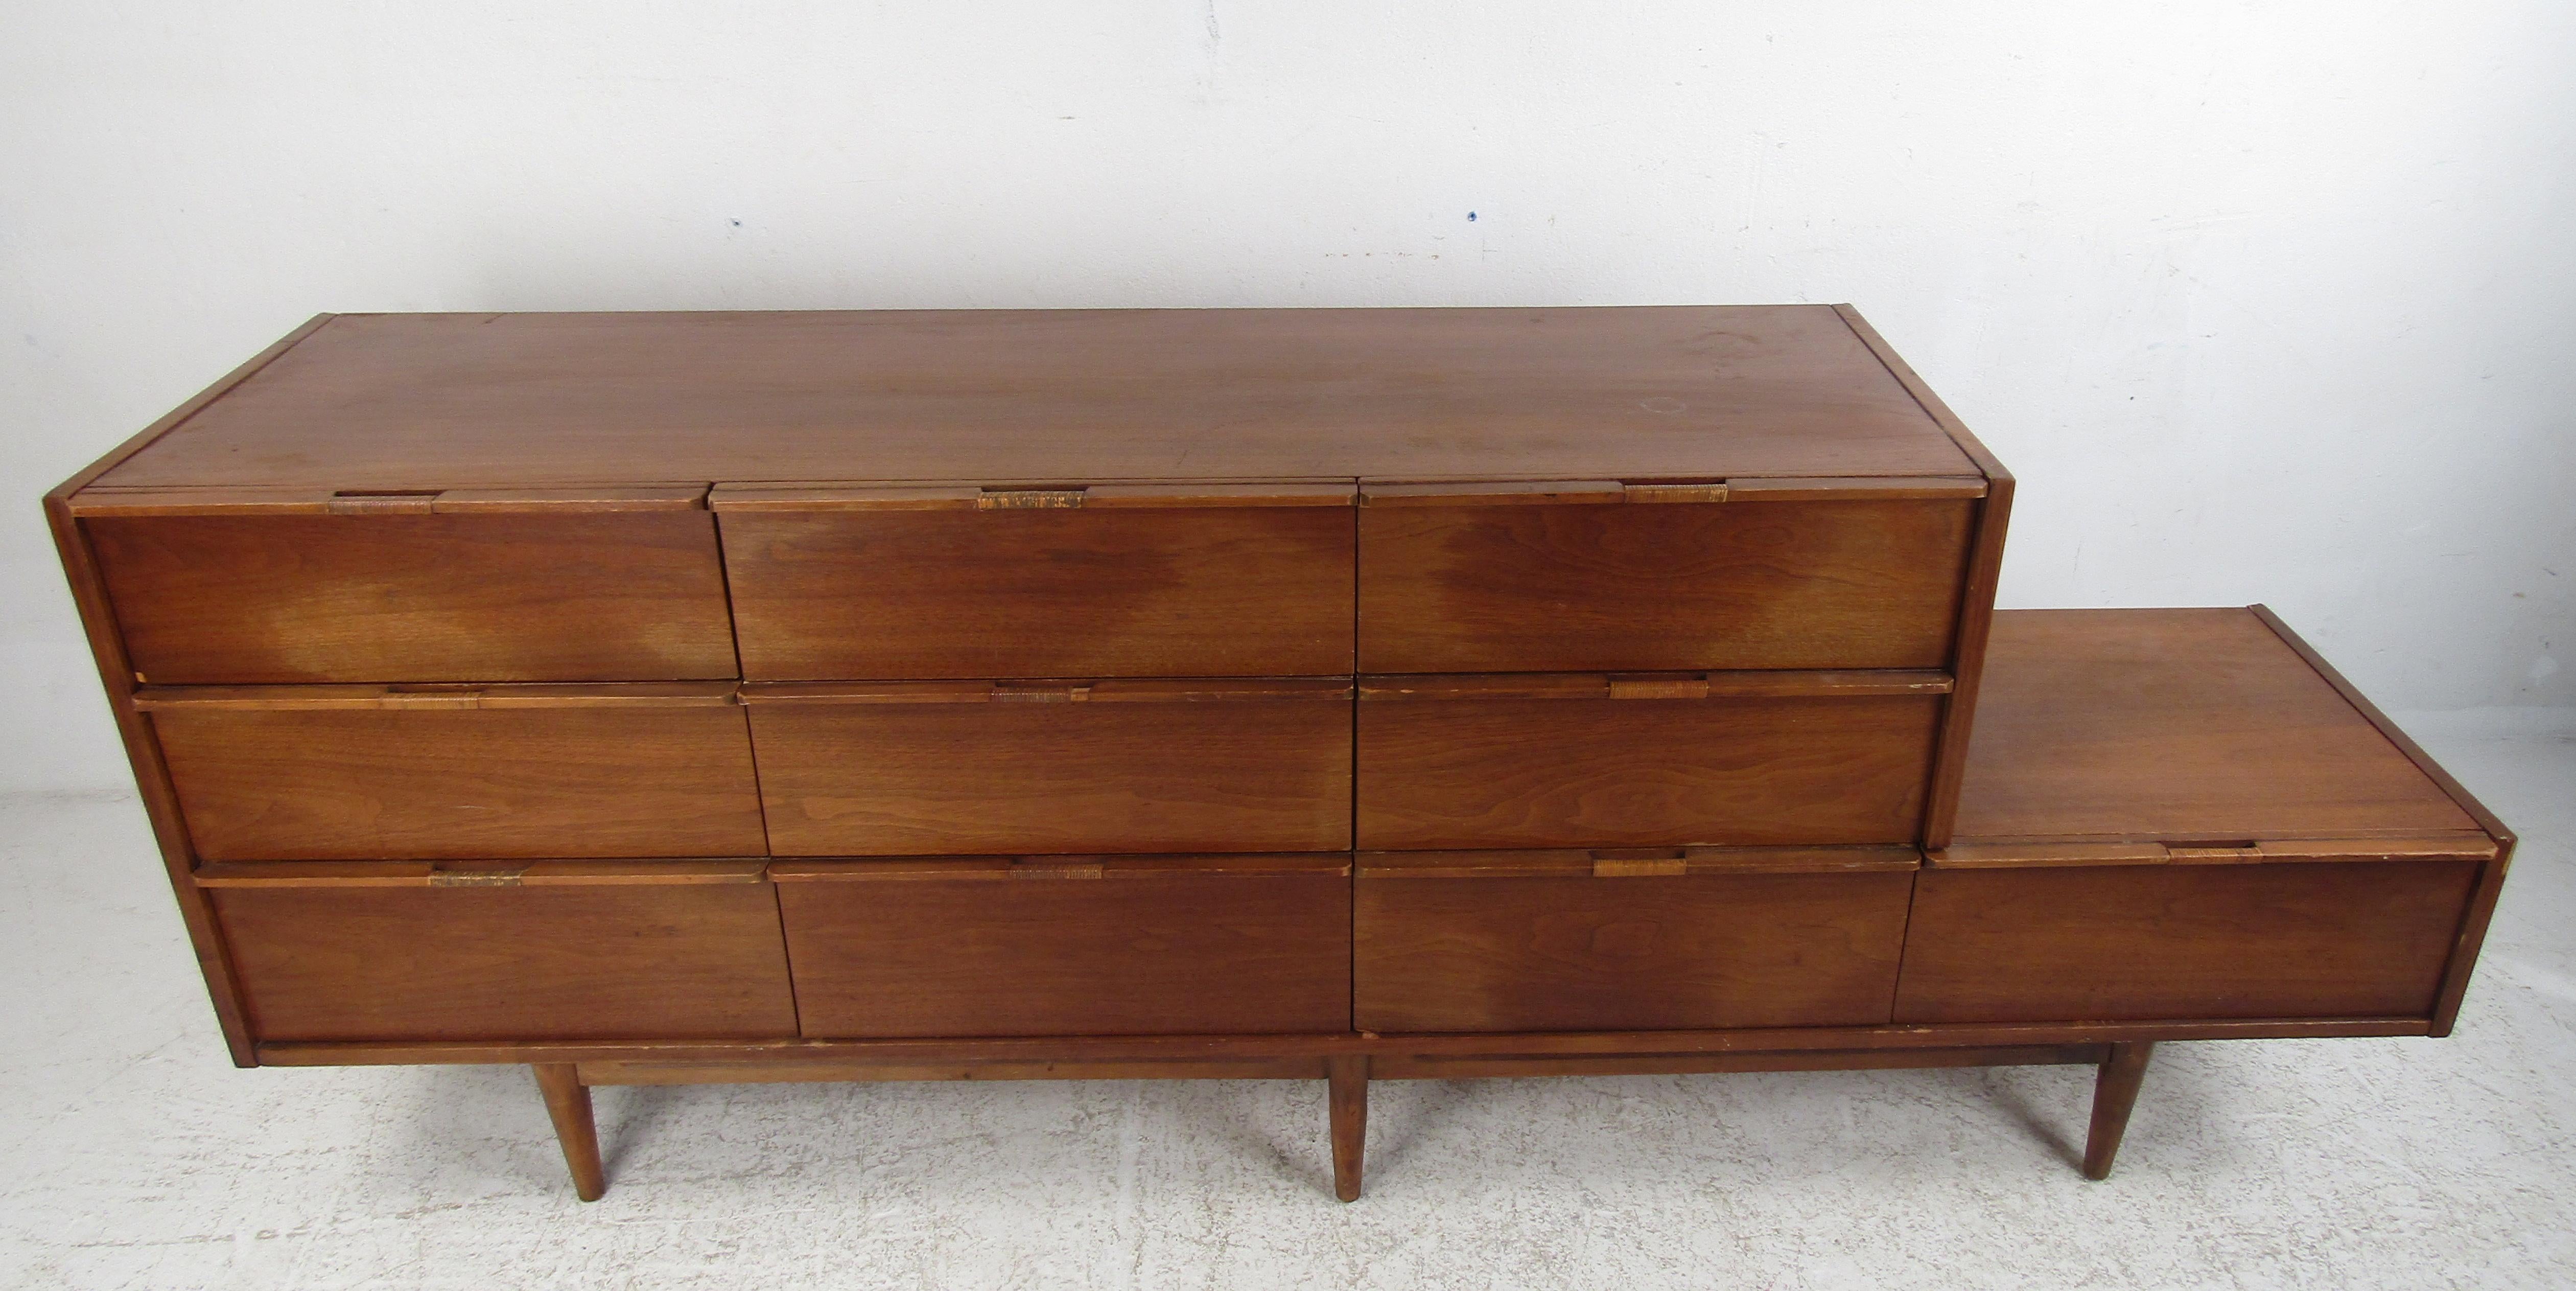 This unique vintage modern dresser boasts a step-side design with an additional drawer on the right side. A sleek case piece with ten hefty drawers ensuring plenty of room for storage. The beautiful woven drawer pulls and a charming vintage walnut